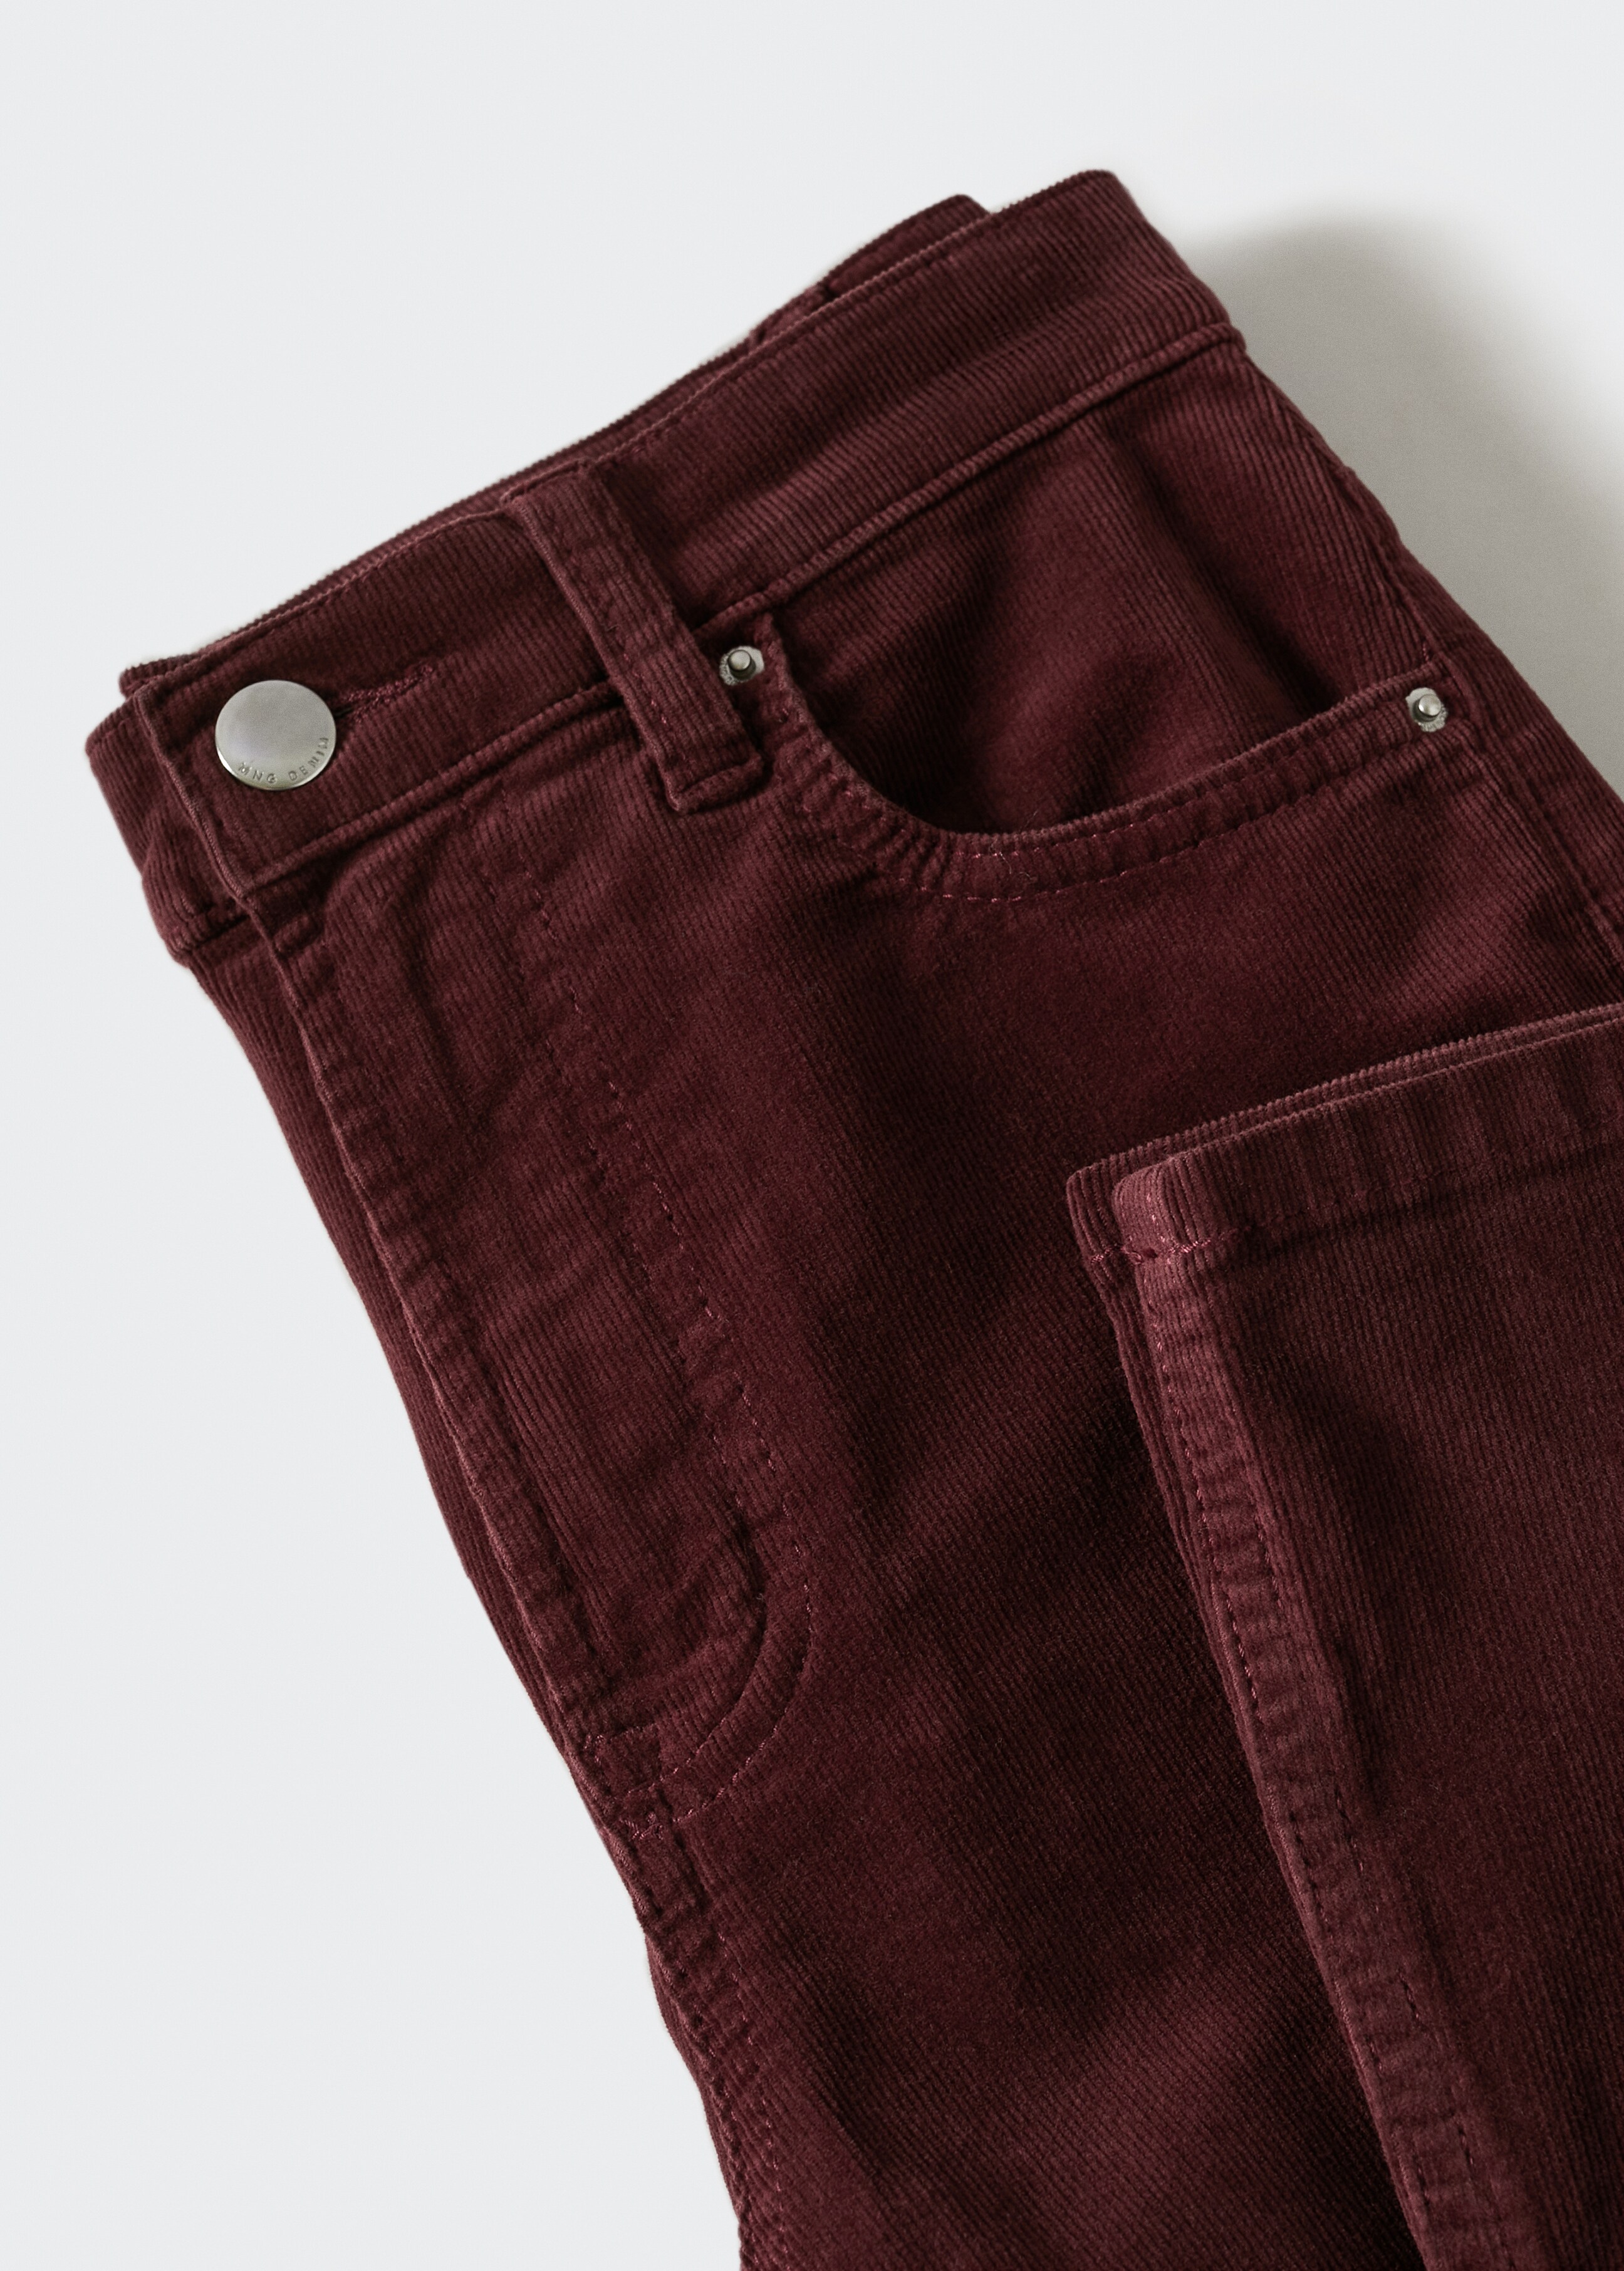 Corduroy bootcut jeans - Details of the article 8